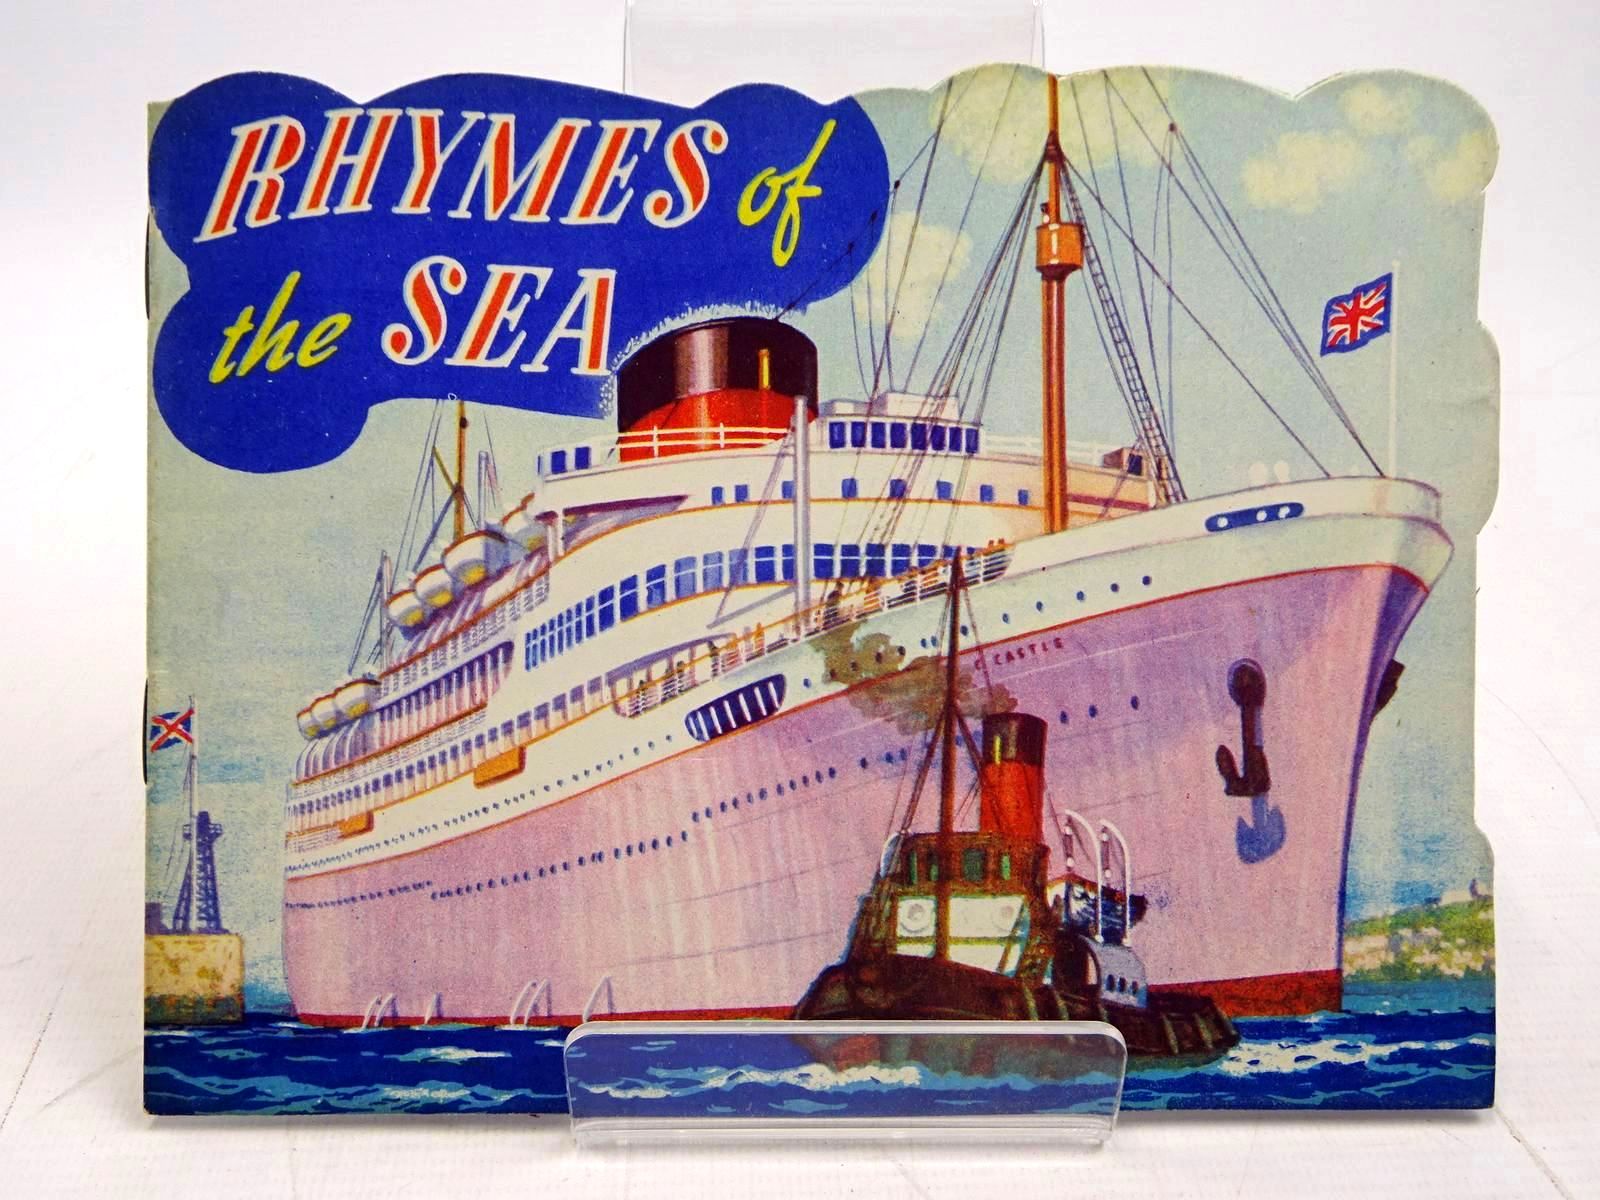 Photo of RHYMES OF THE SEA published by Birn Brothers Ltd. (STOCK CODE: 2131556)  for sale by Stella & Rose's Books